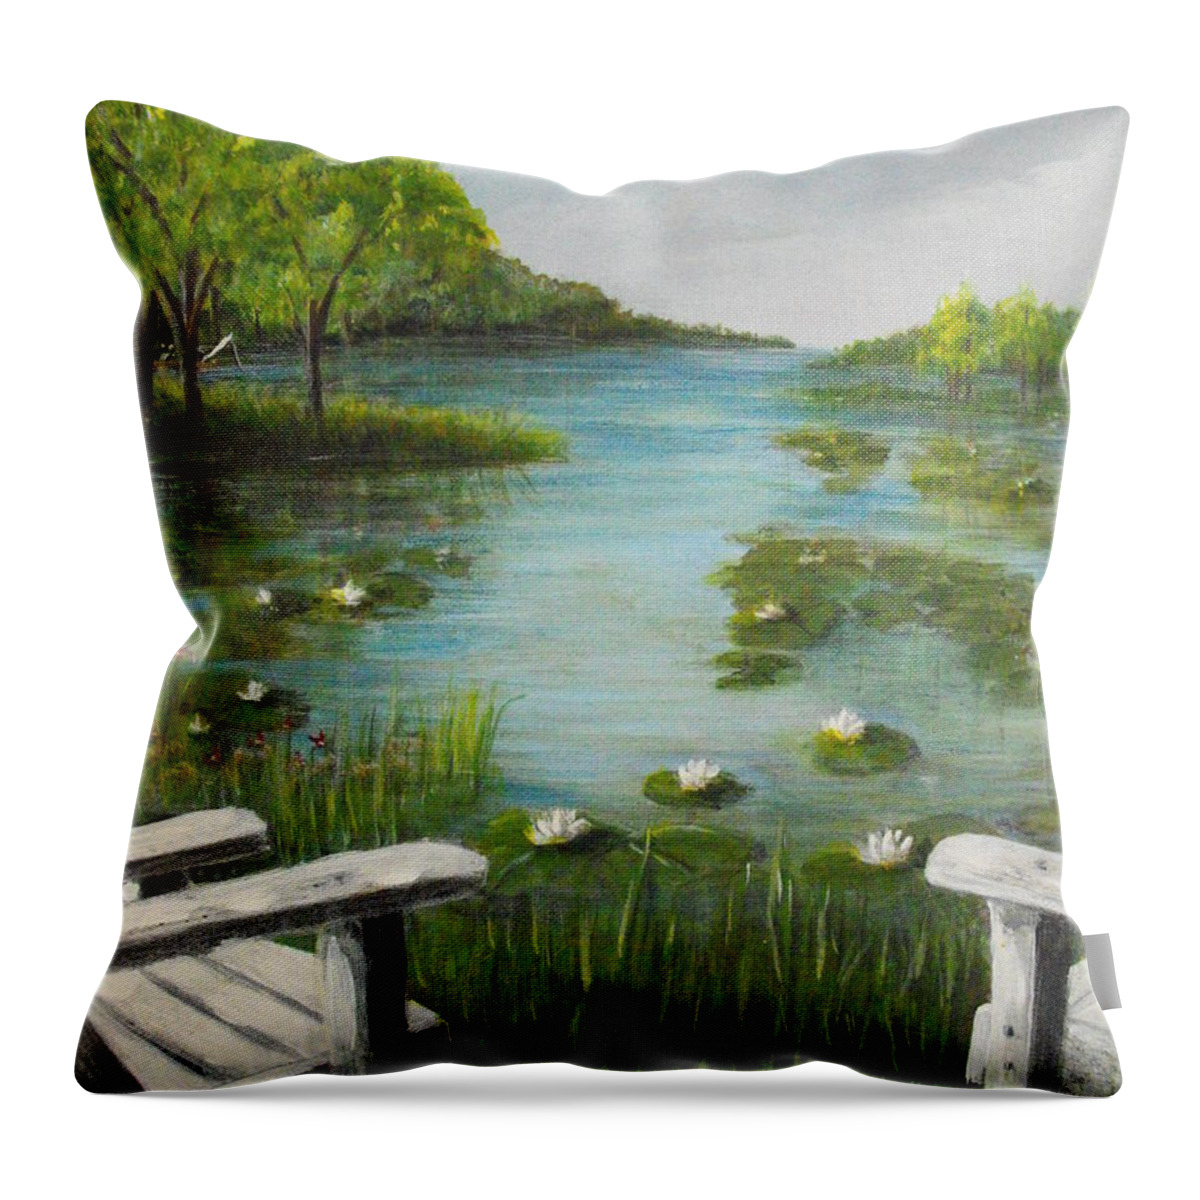 Landscape Throw Pillow featuring the painting Peaceful Afternoon by Susan Bruner